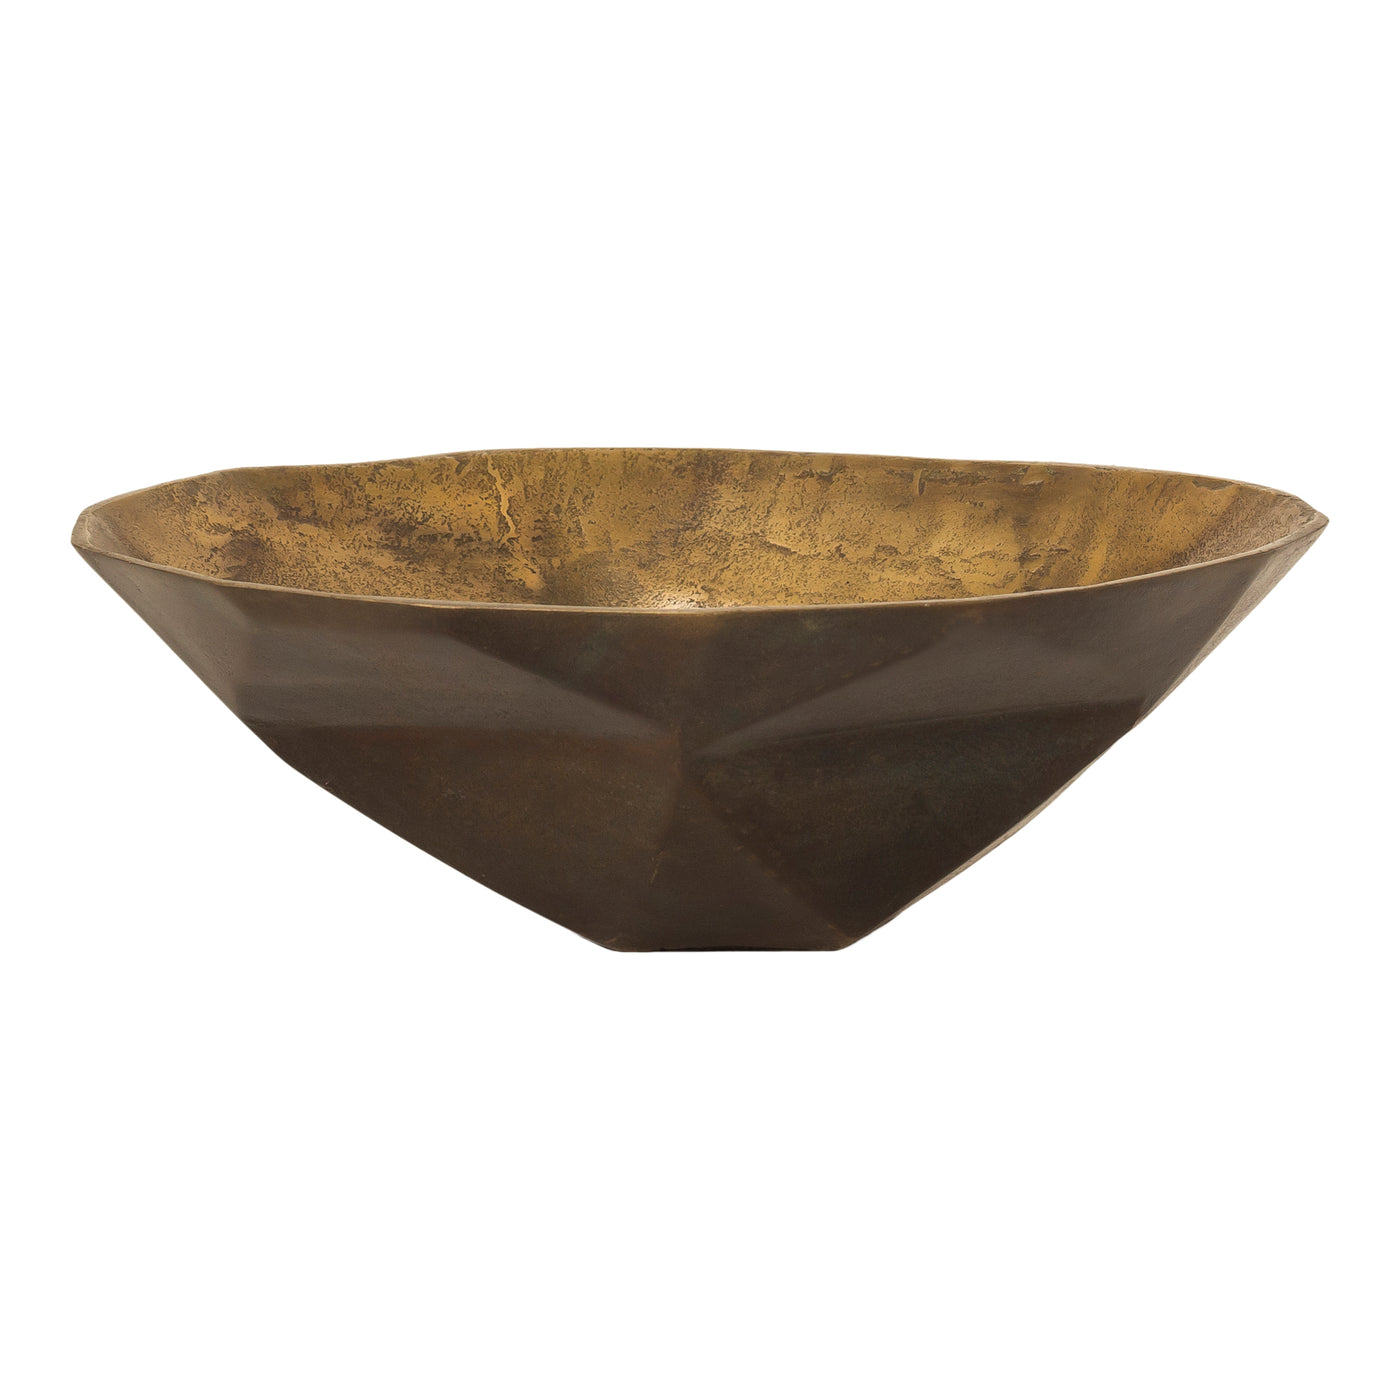 This large accent bowl features a cubist-style and an aged-finish, perfect for displaying other accents, or simply complim...